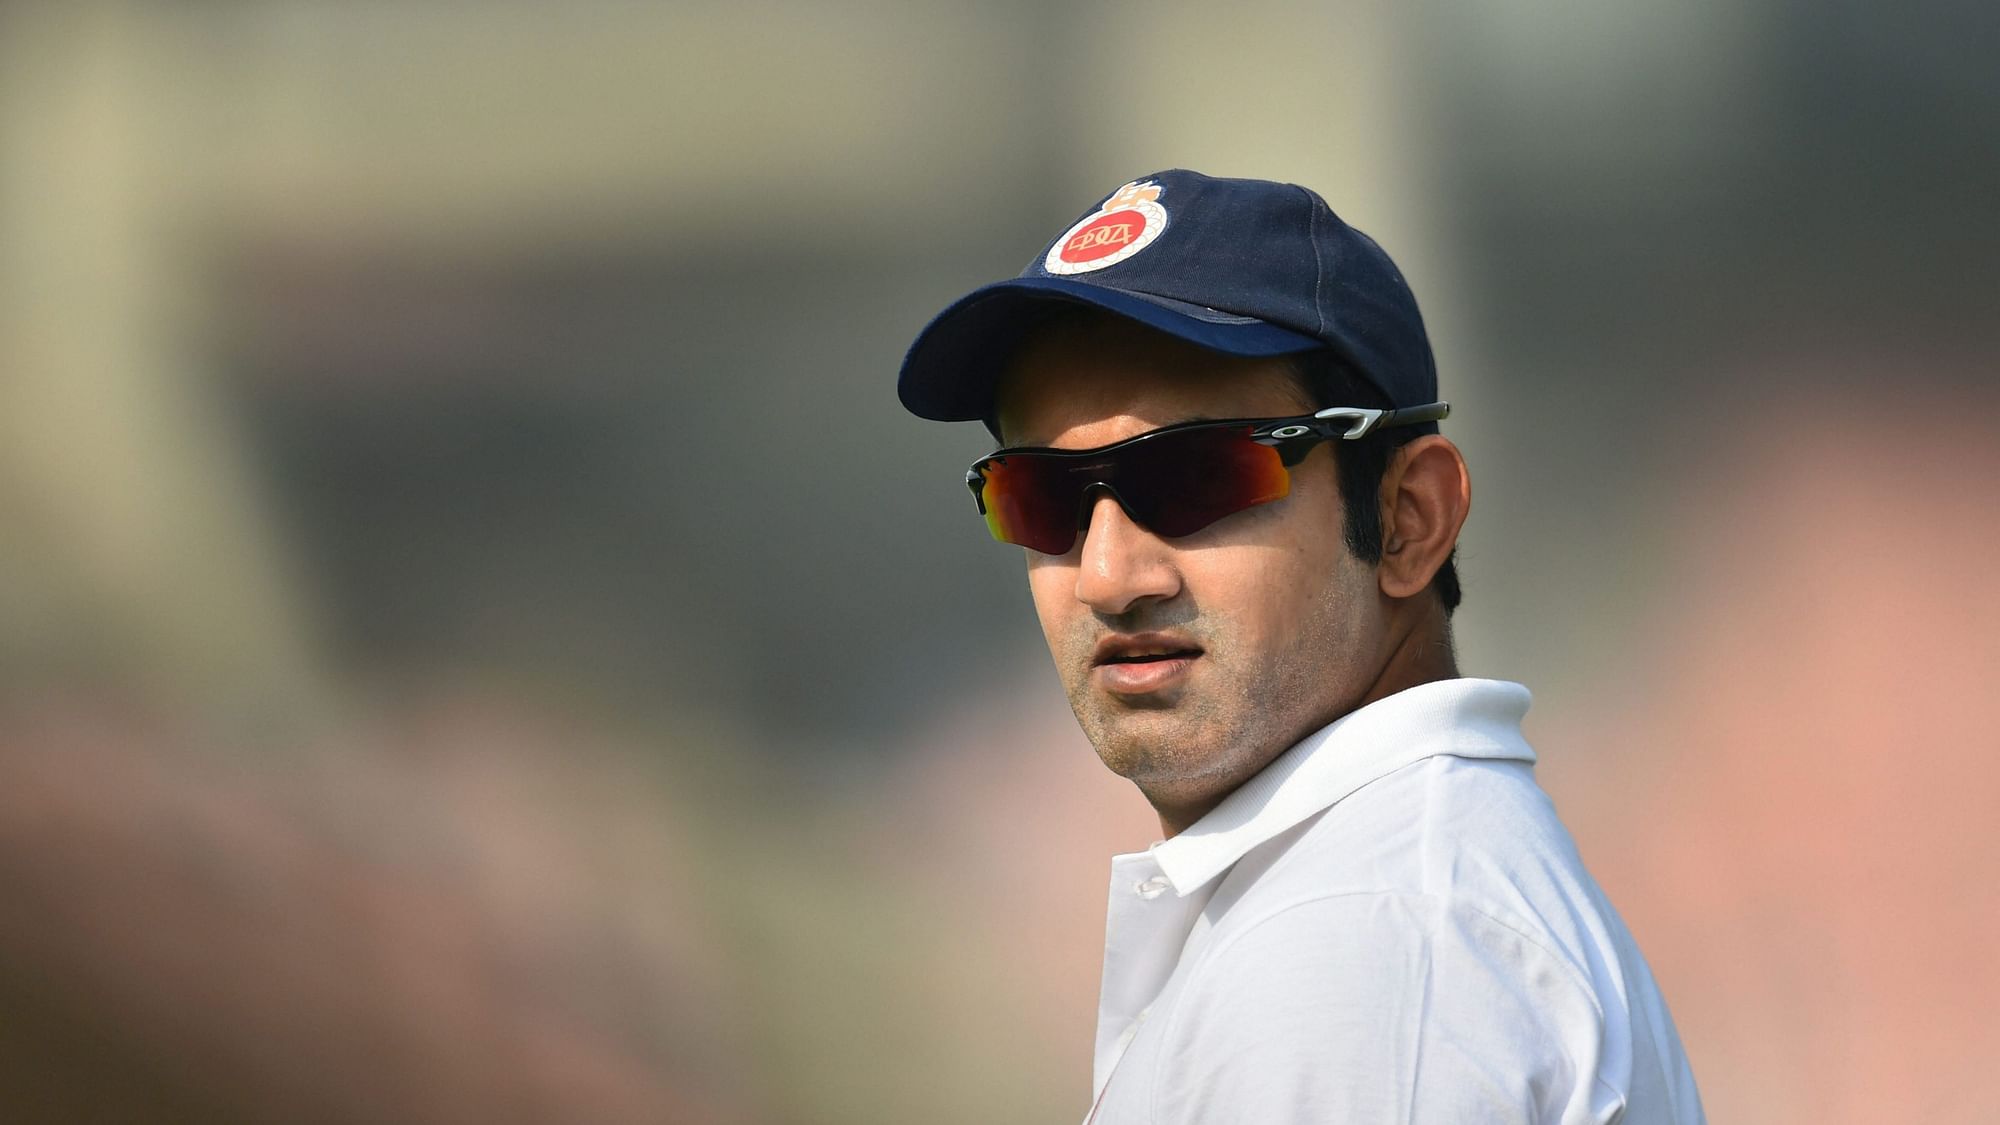 Gautam Gambhir replies to Paddy Upton’s statements about him in his new book.